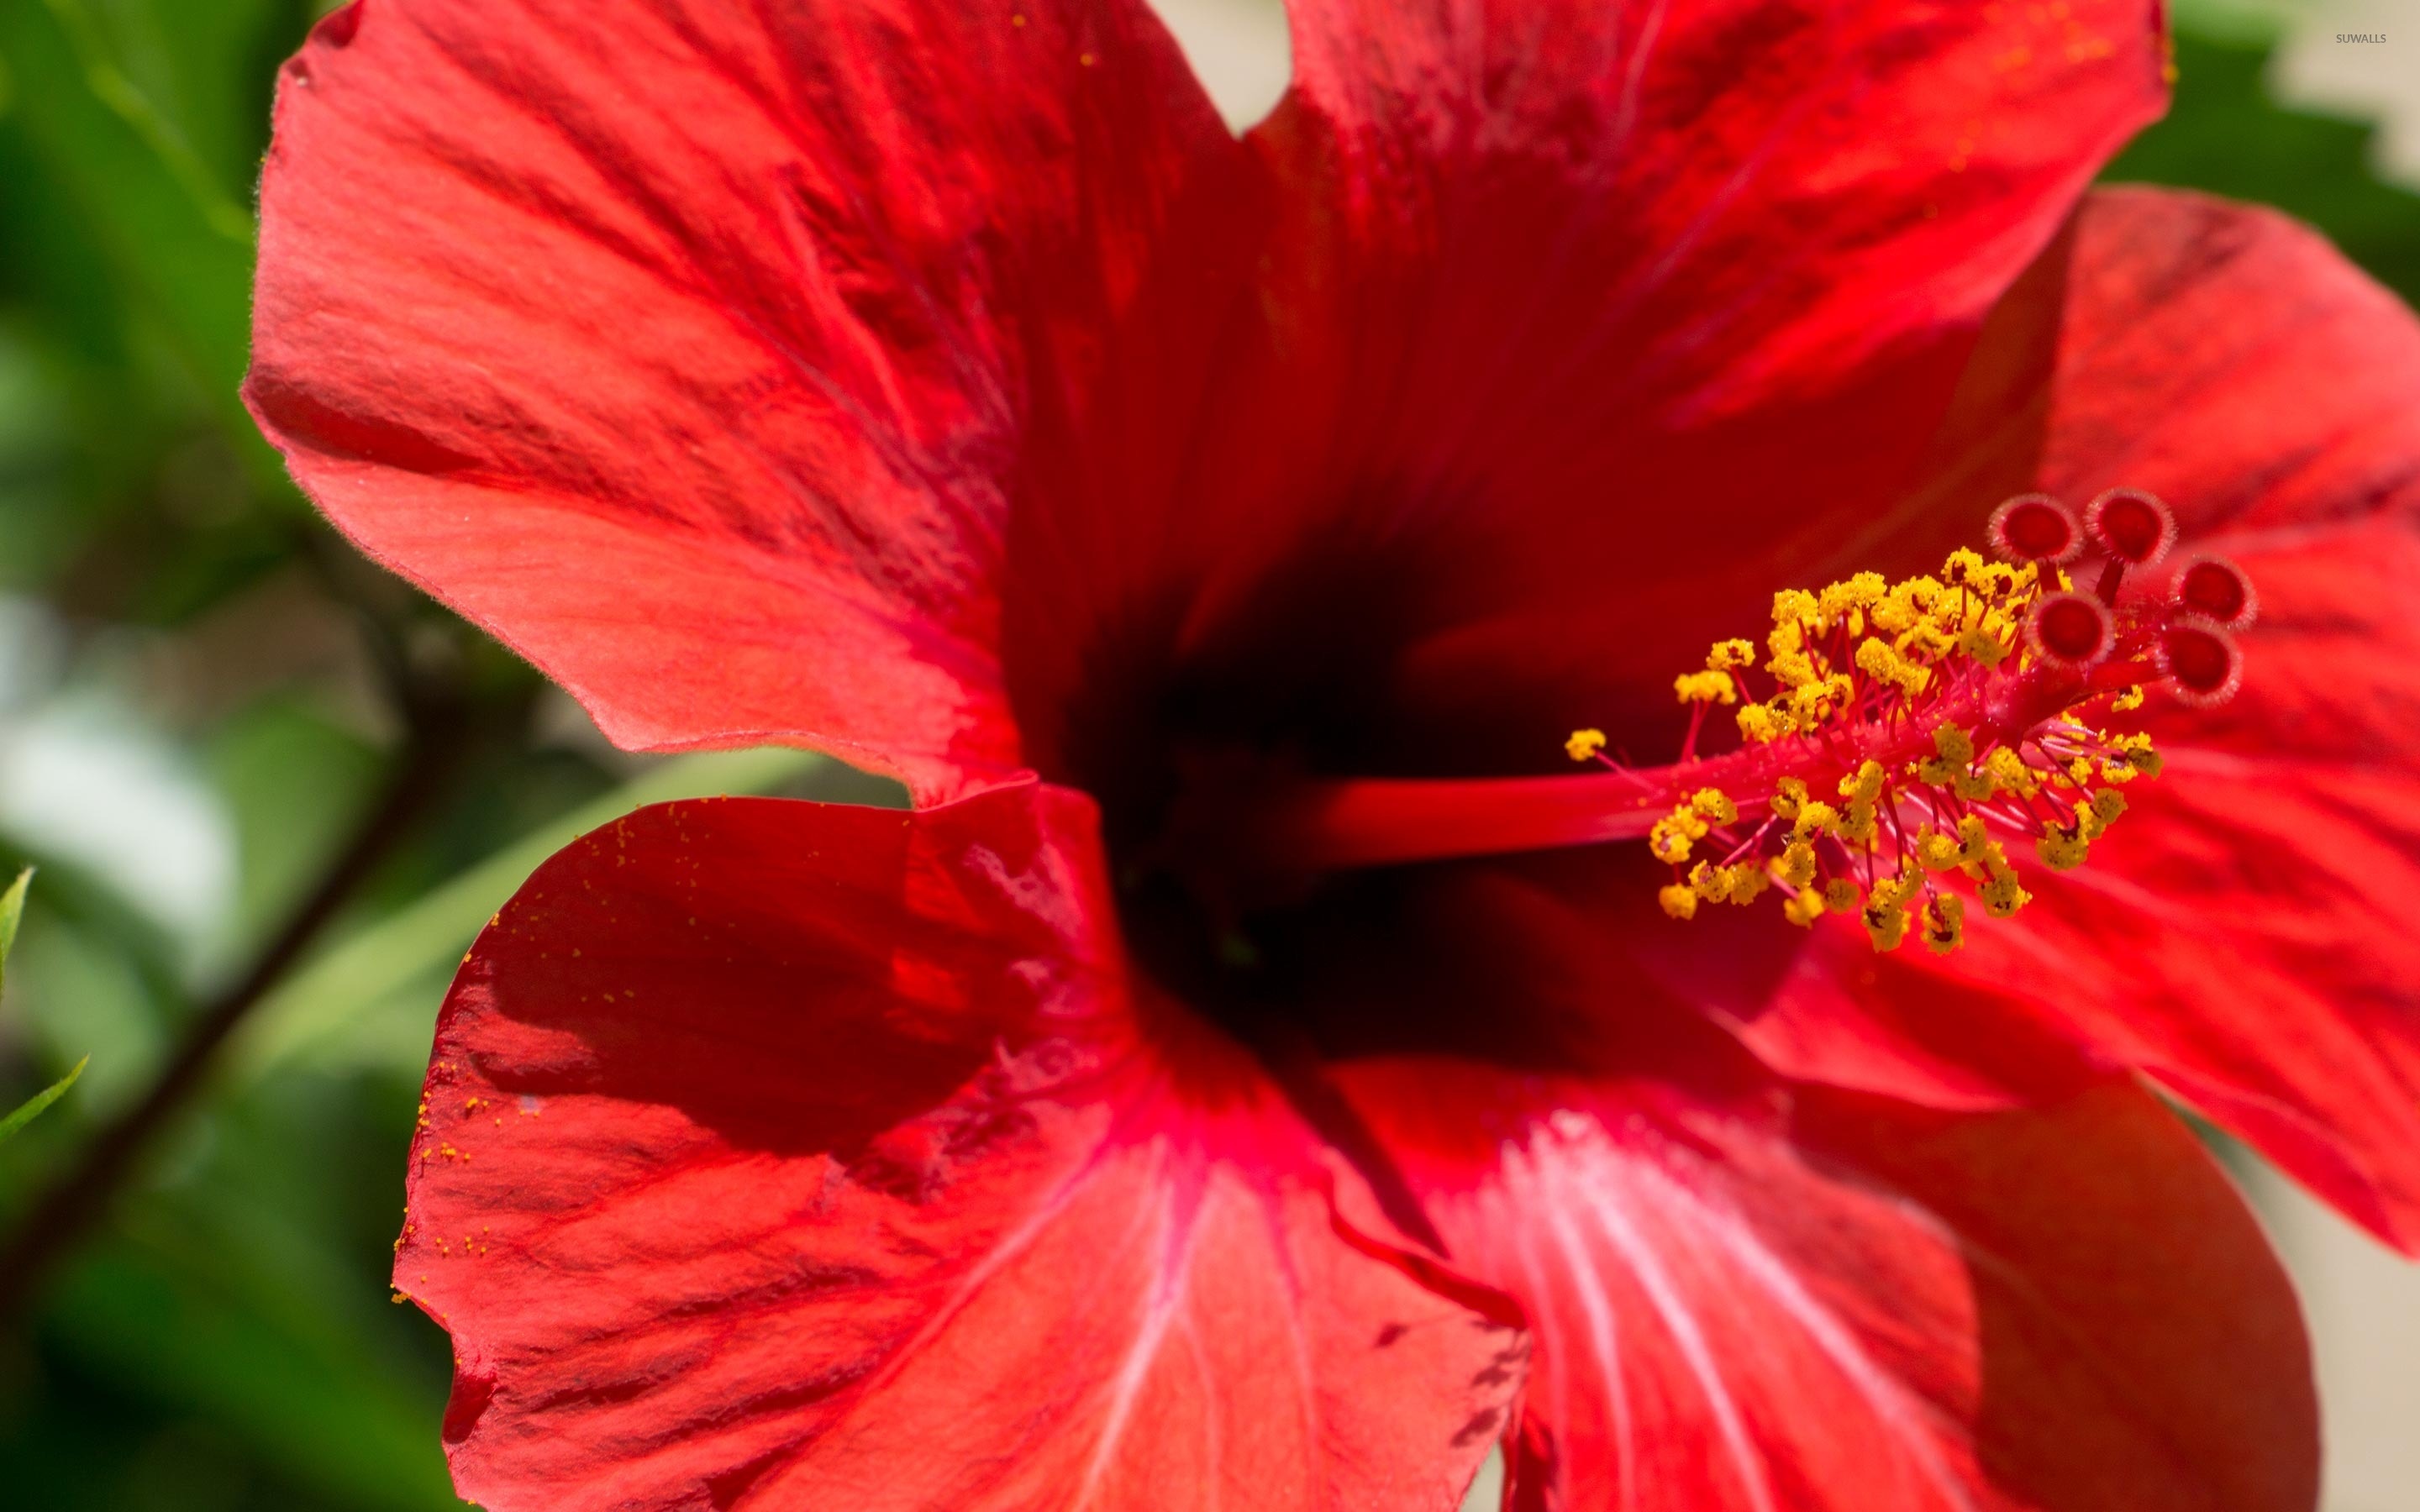 Red hibiscus blossom, Close-up beauty, Stunning floral wallpaper, Nature's charm, 2880x1800 HD Desktop